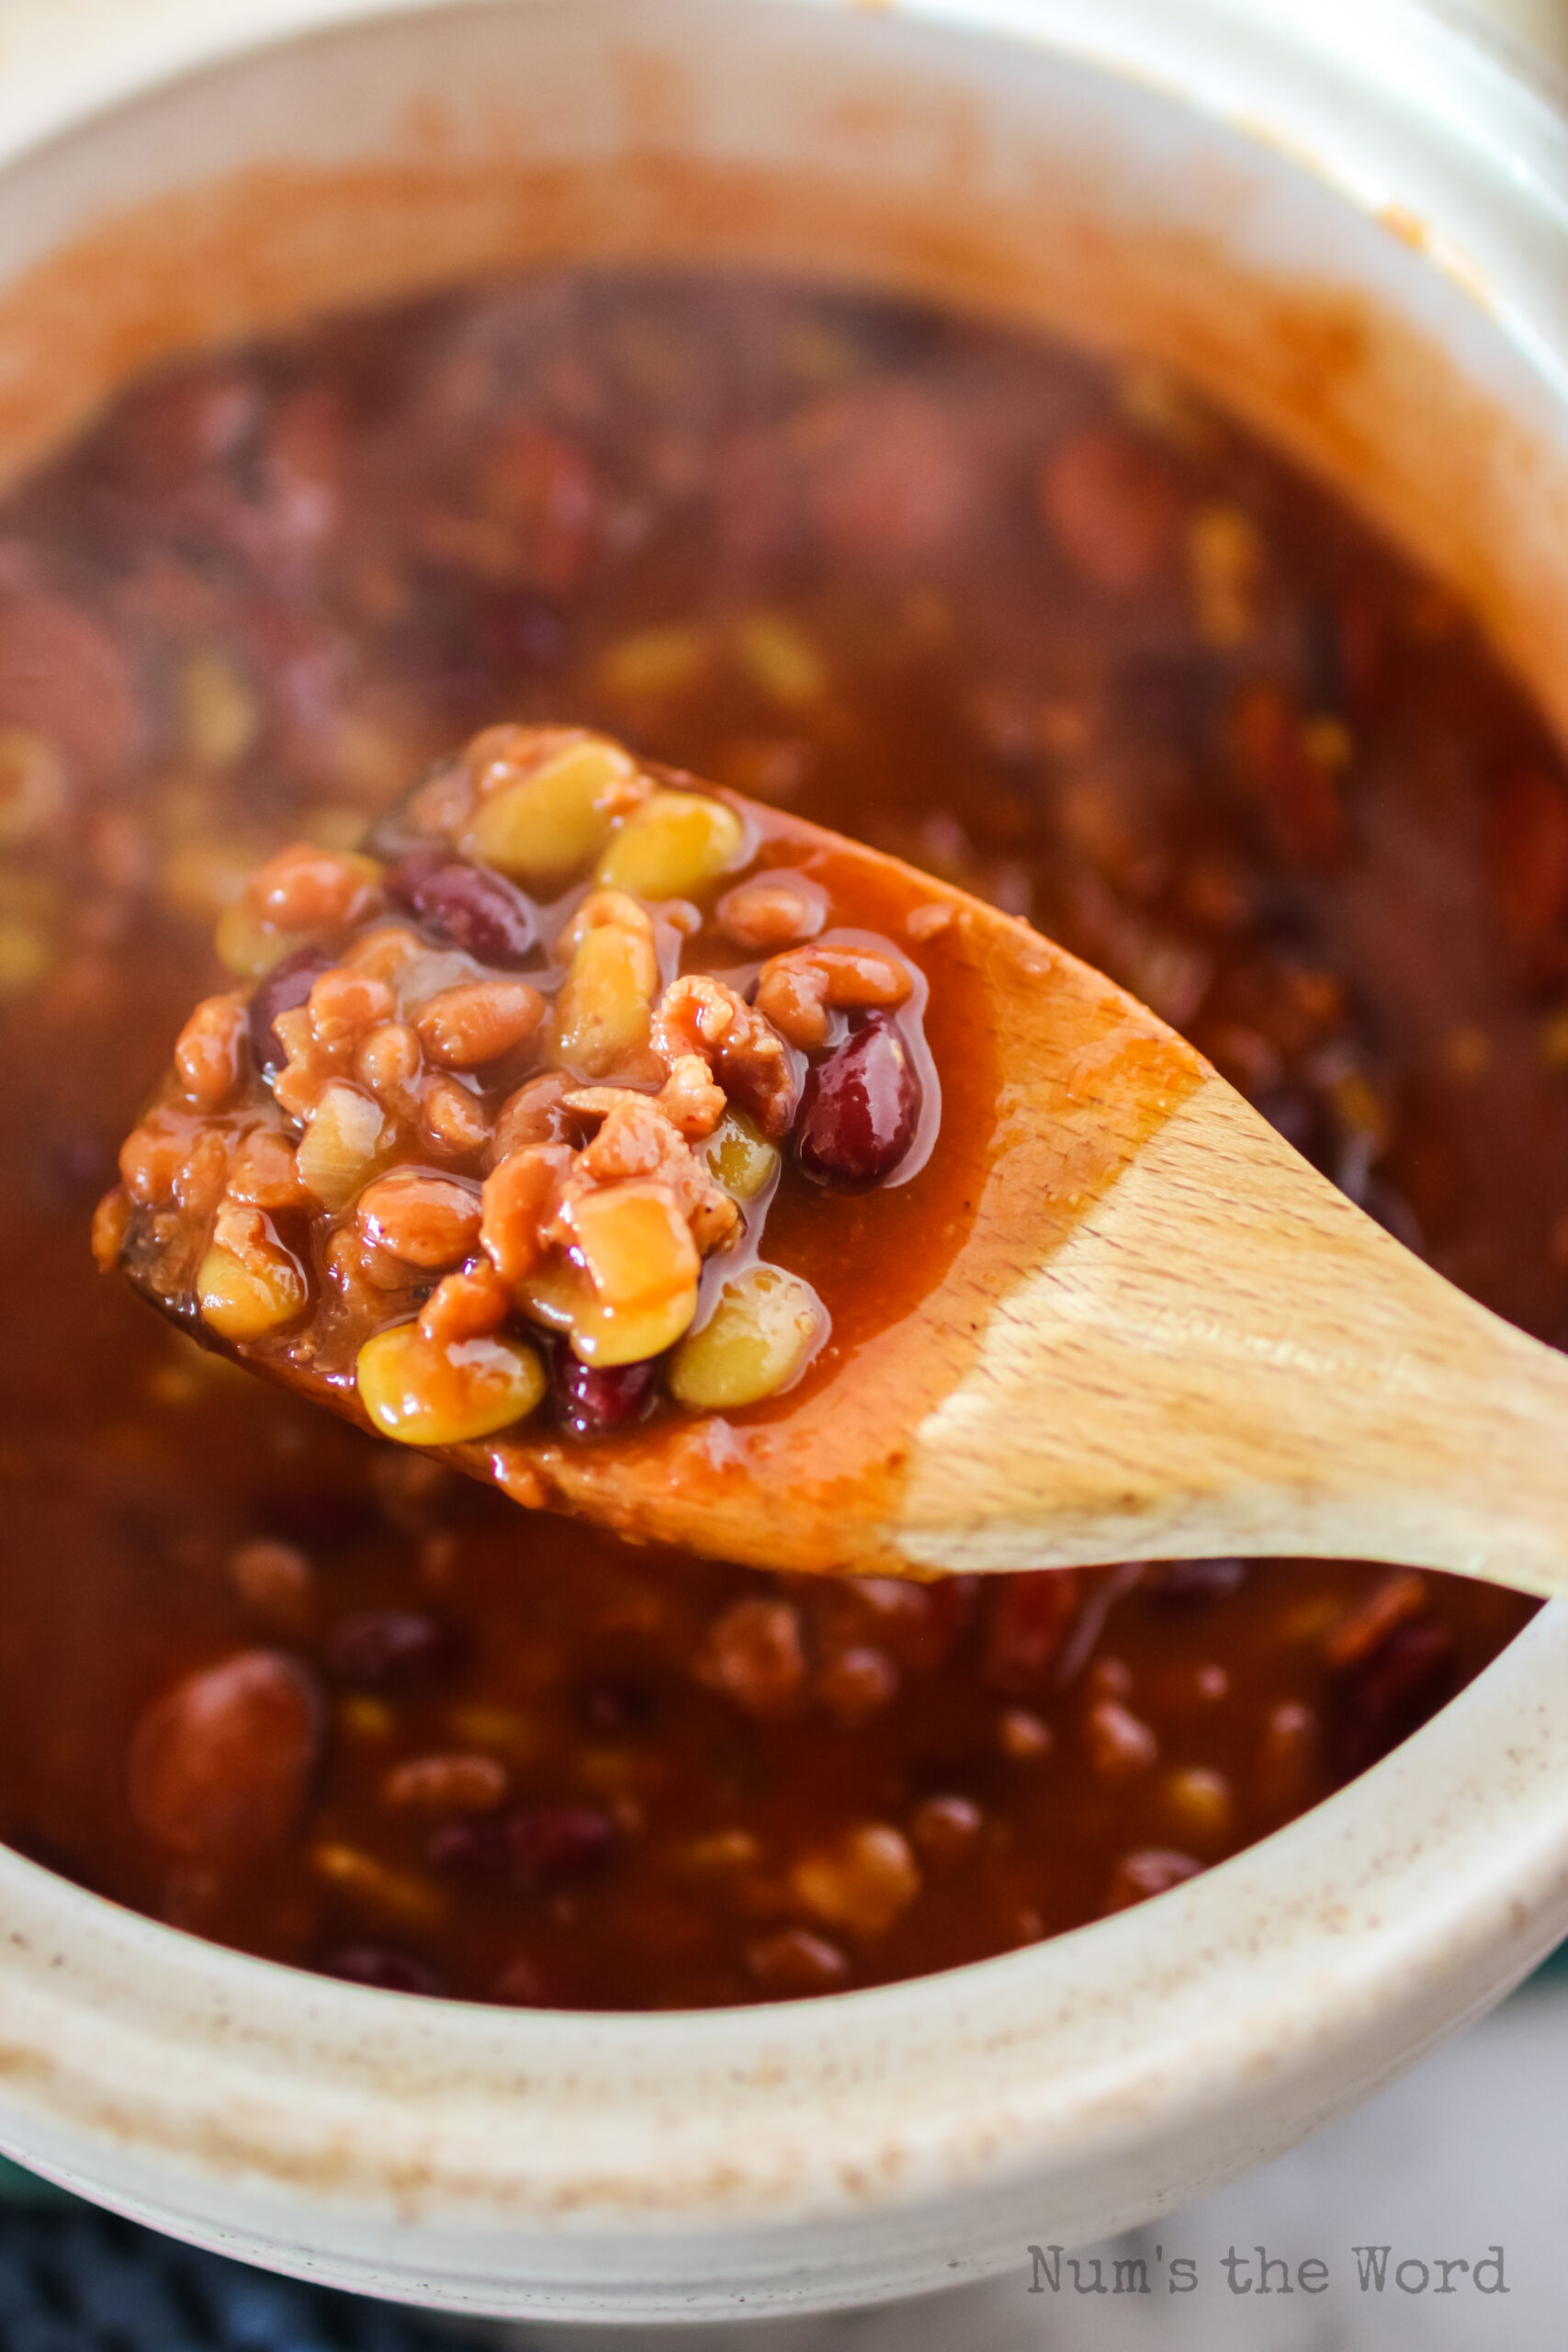 wooden spoon scooping out a portion of cowboy baked beans